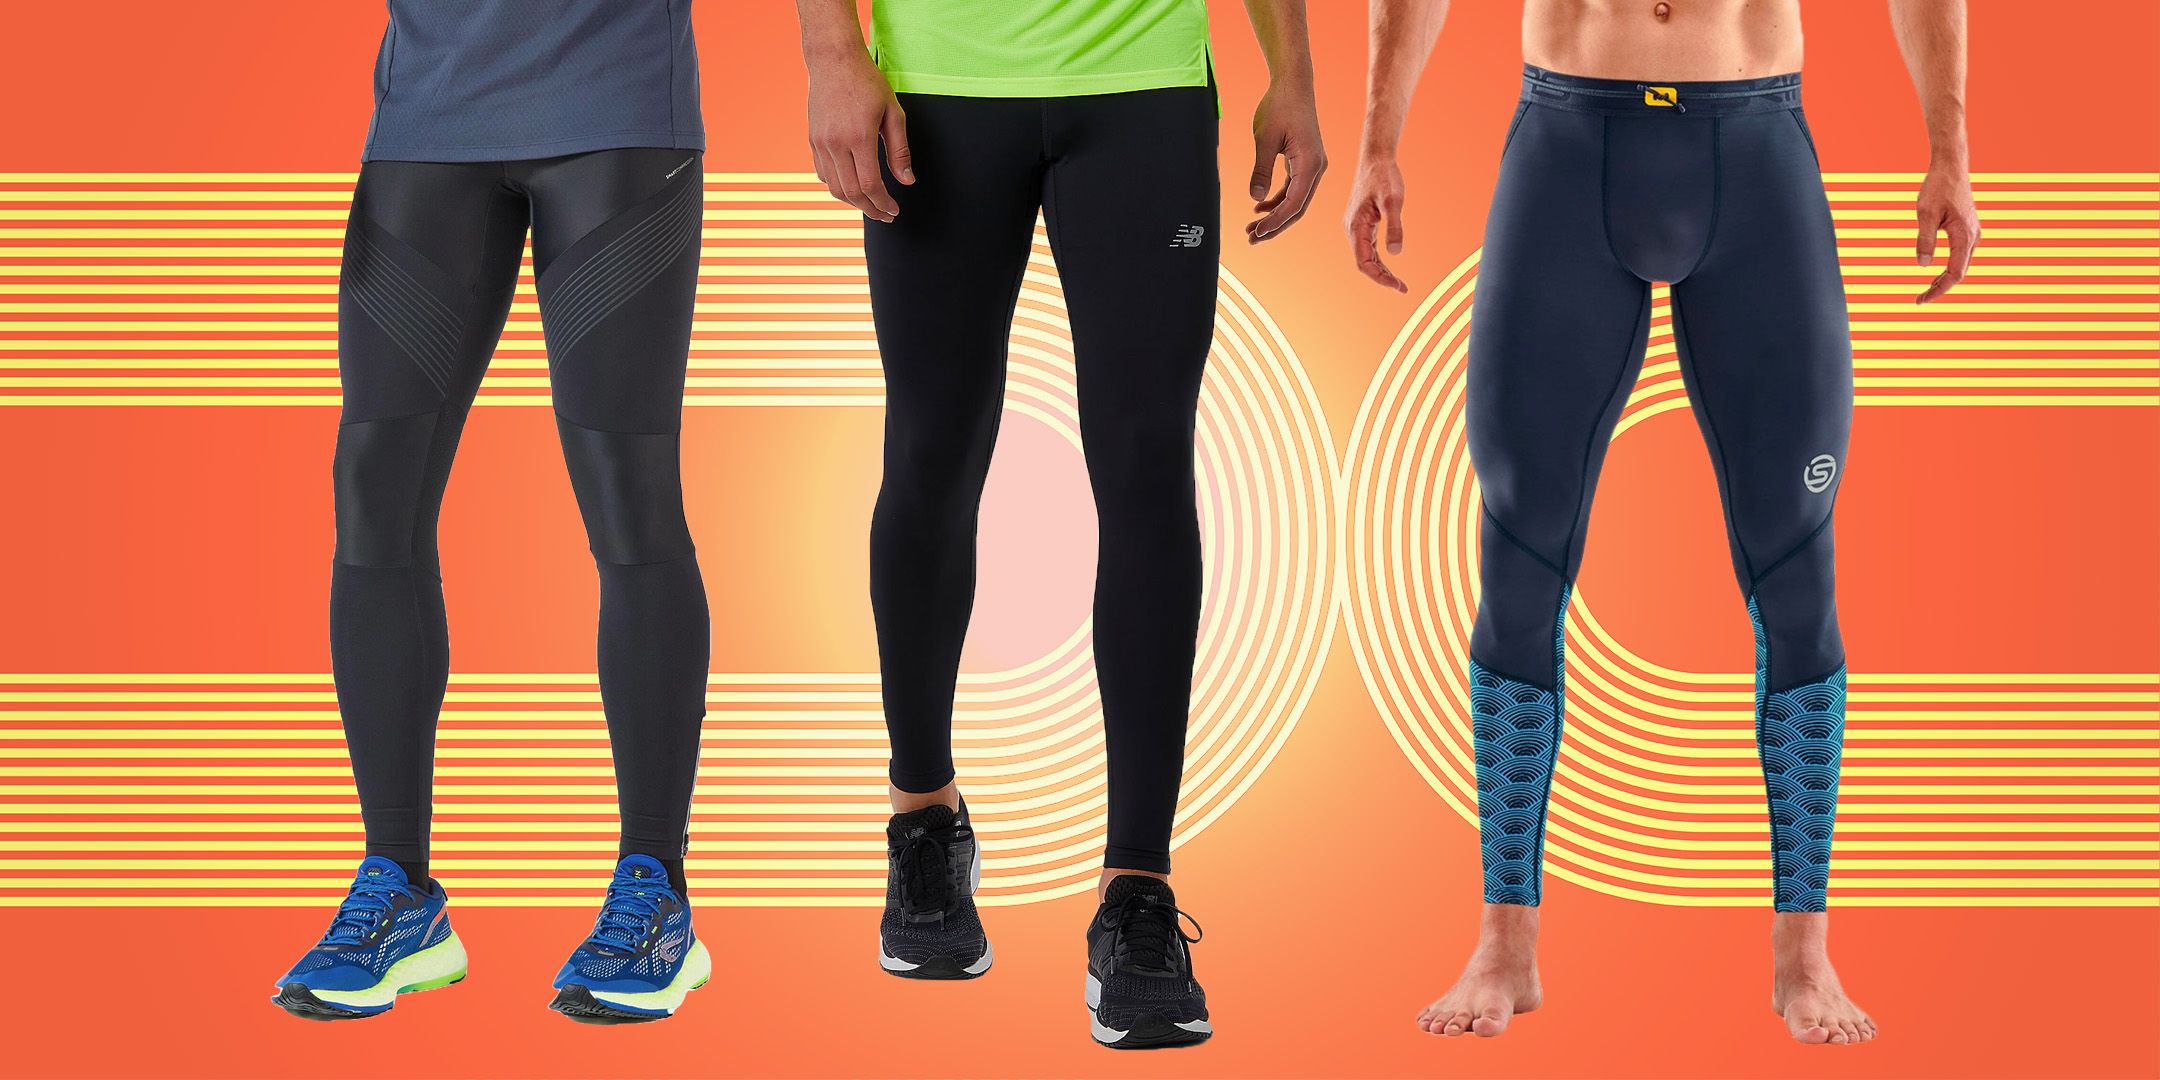 Nike Men's Running Tights (Black, S) : Amazon.in: Clothing & Accessories